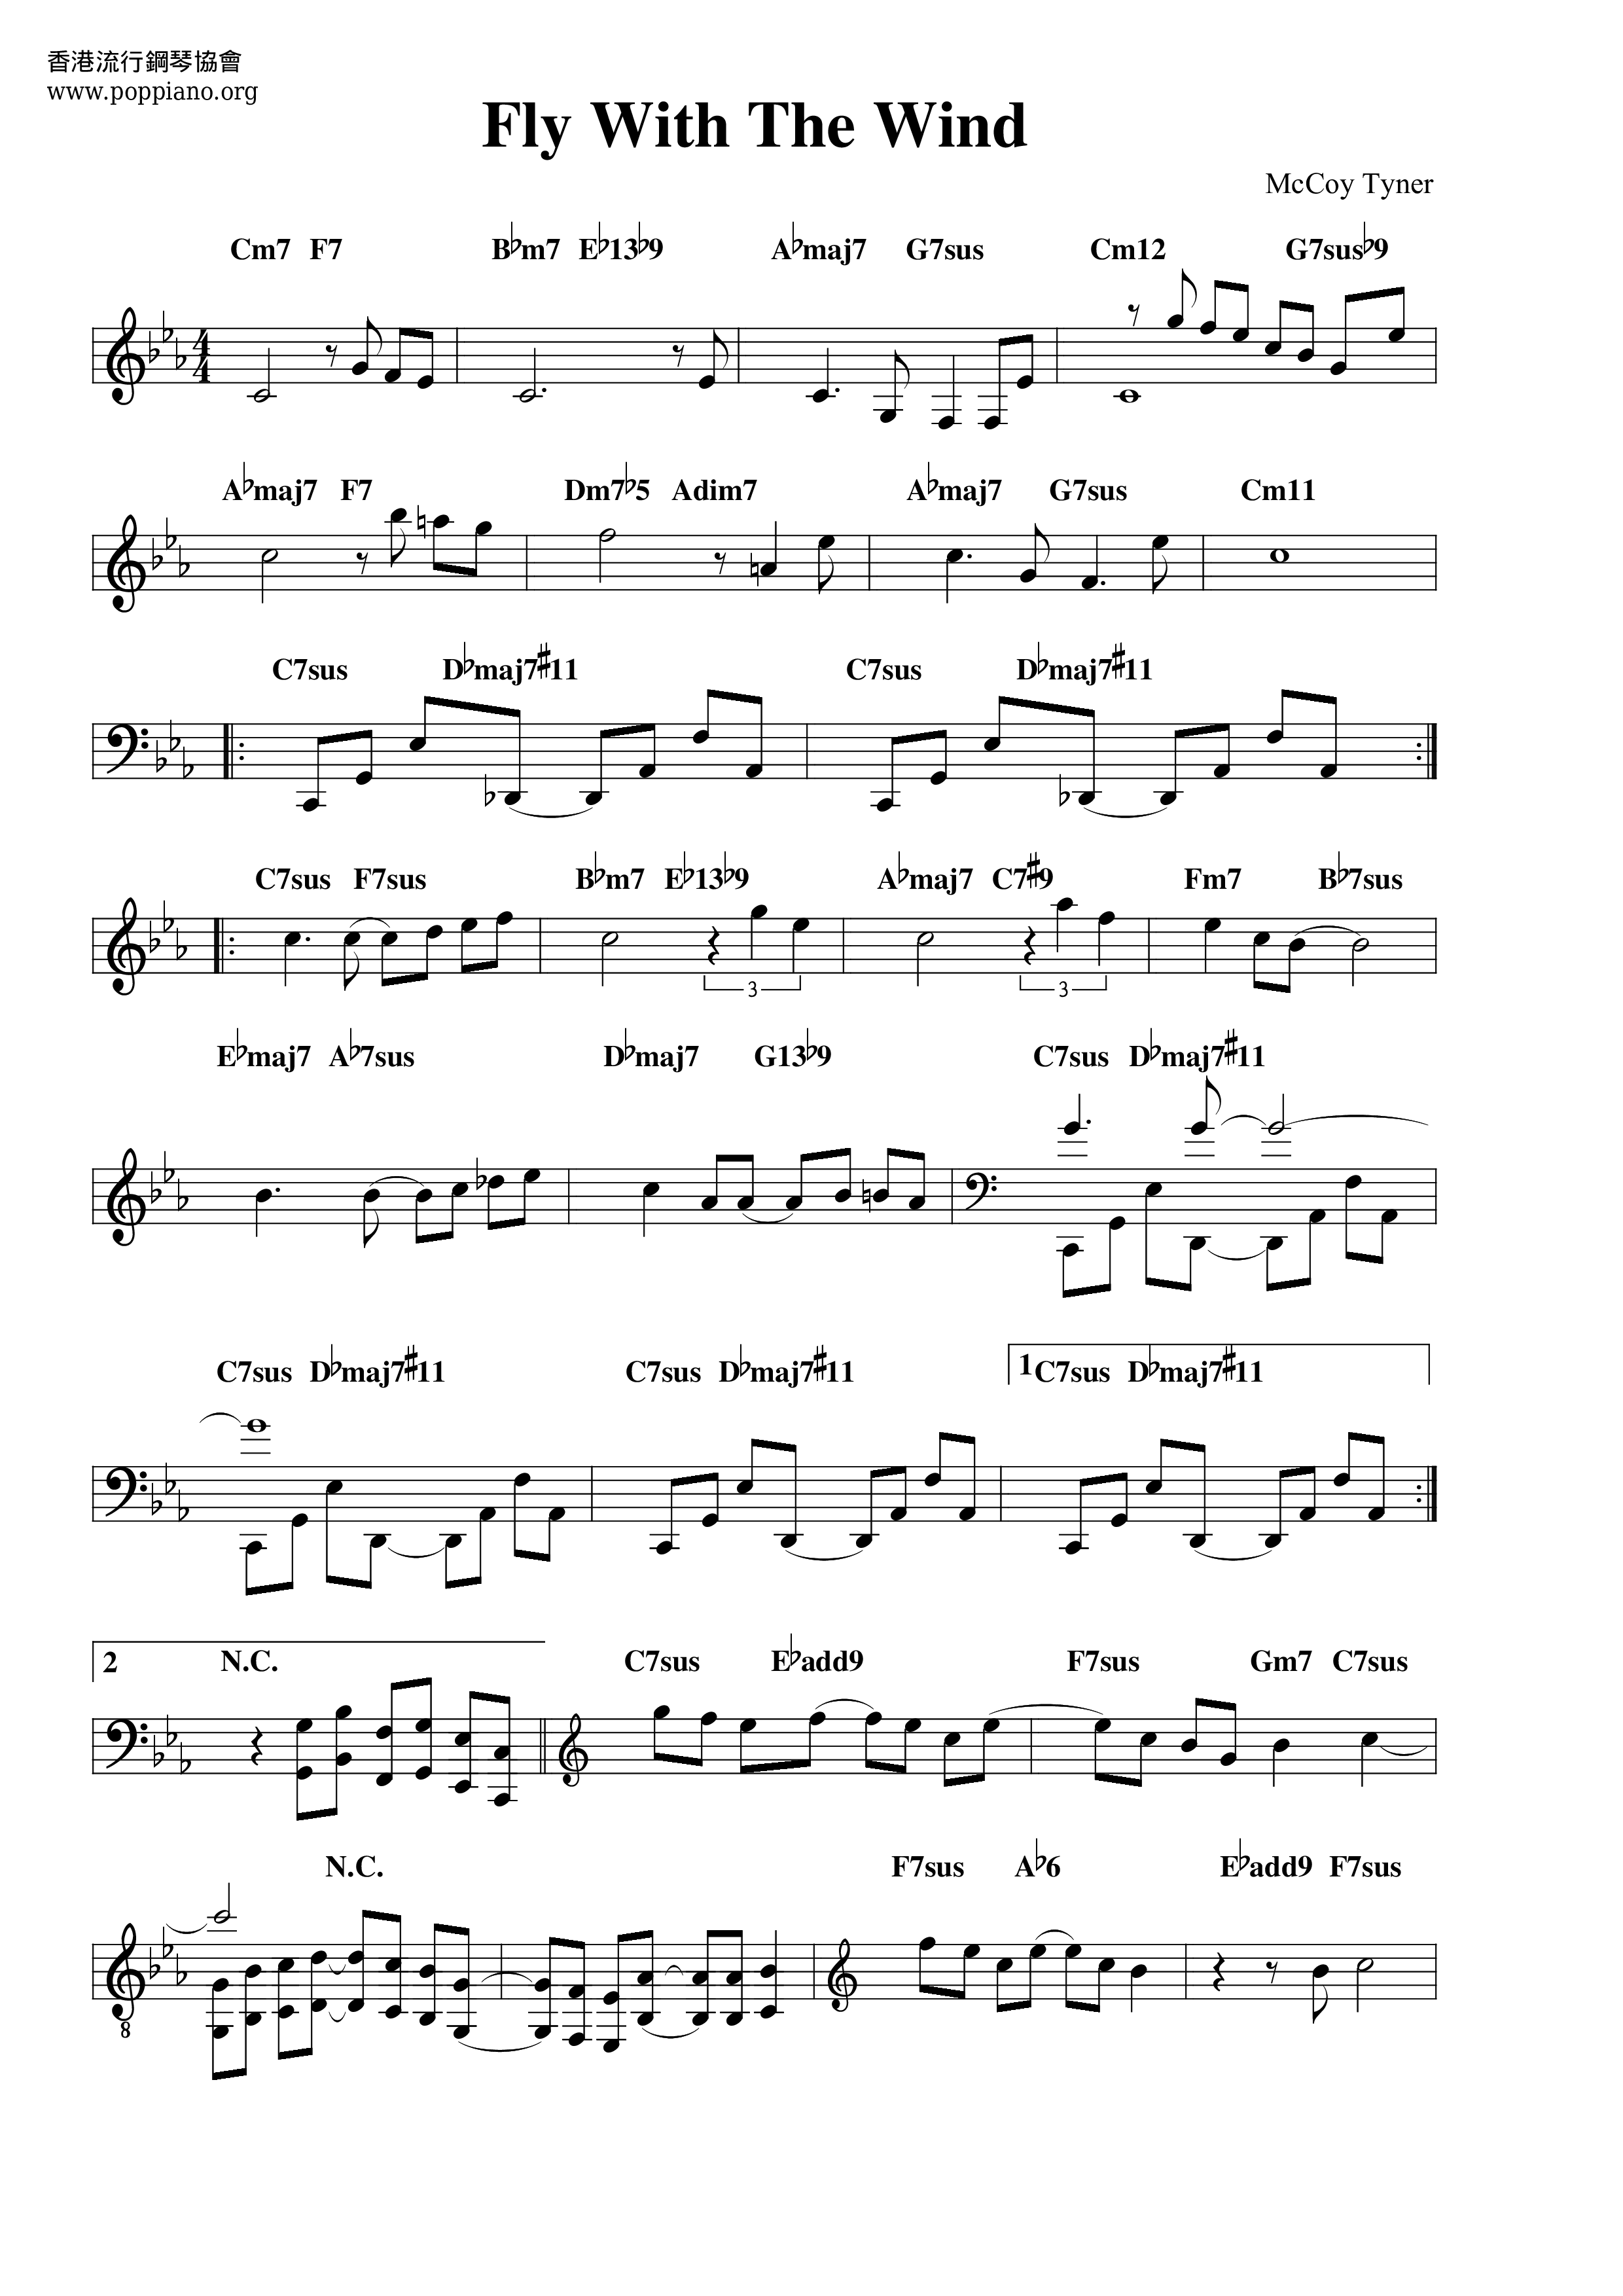 Fly With The Wind Score